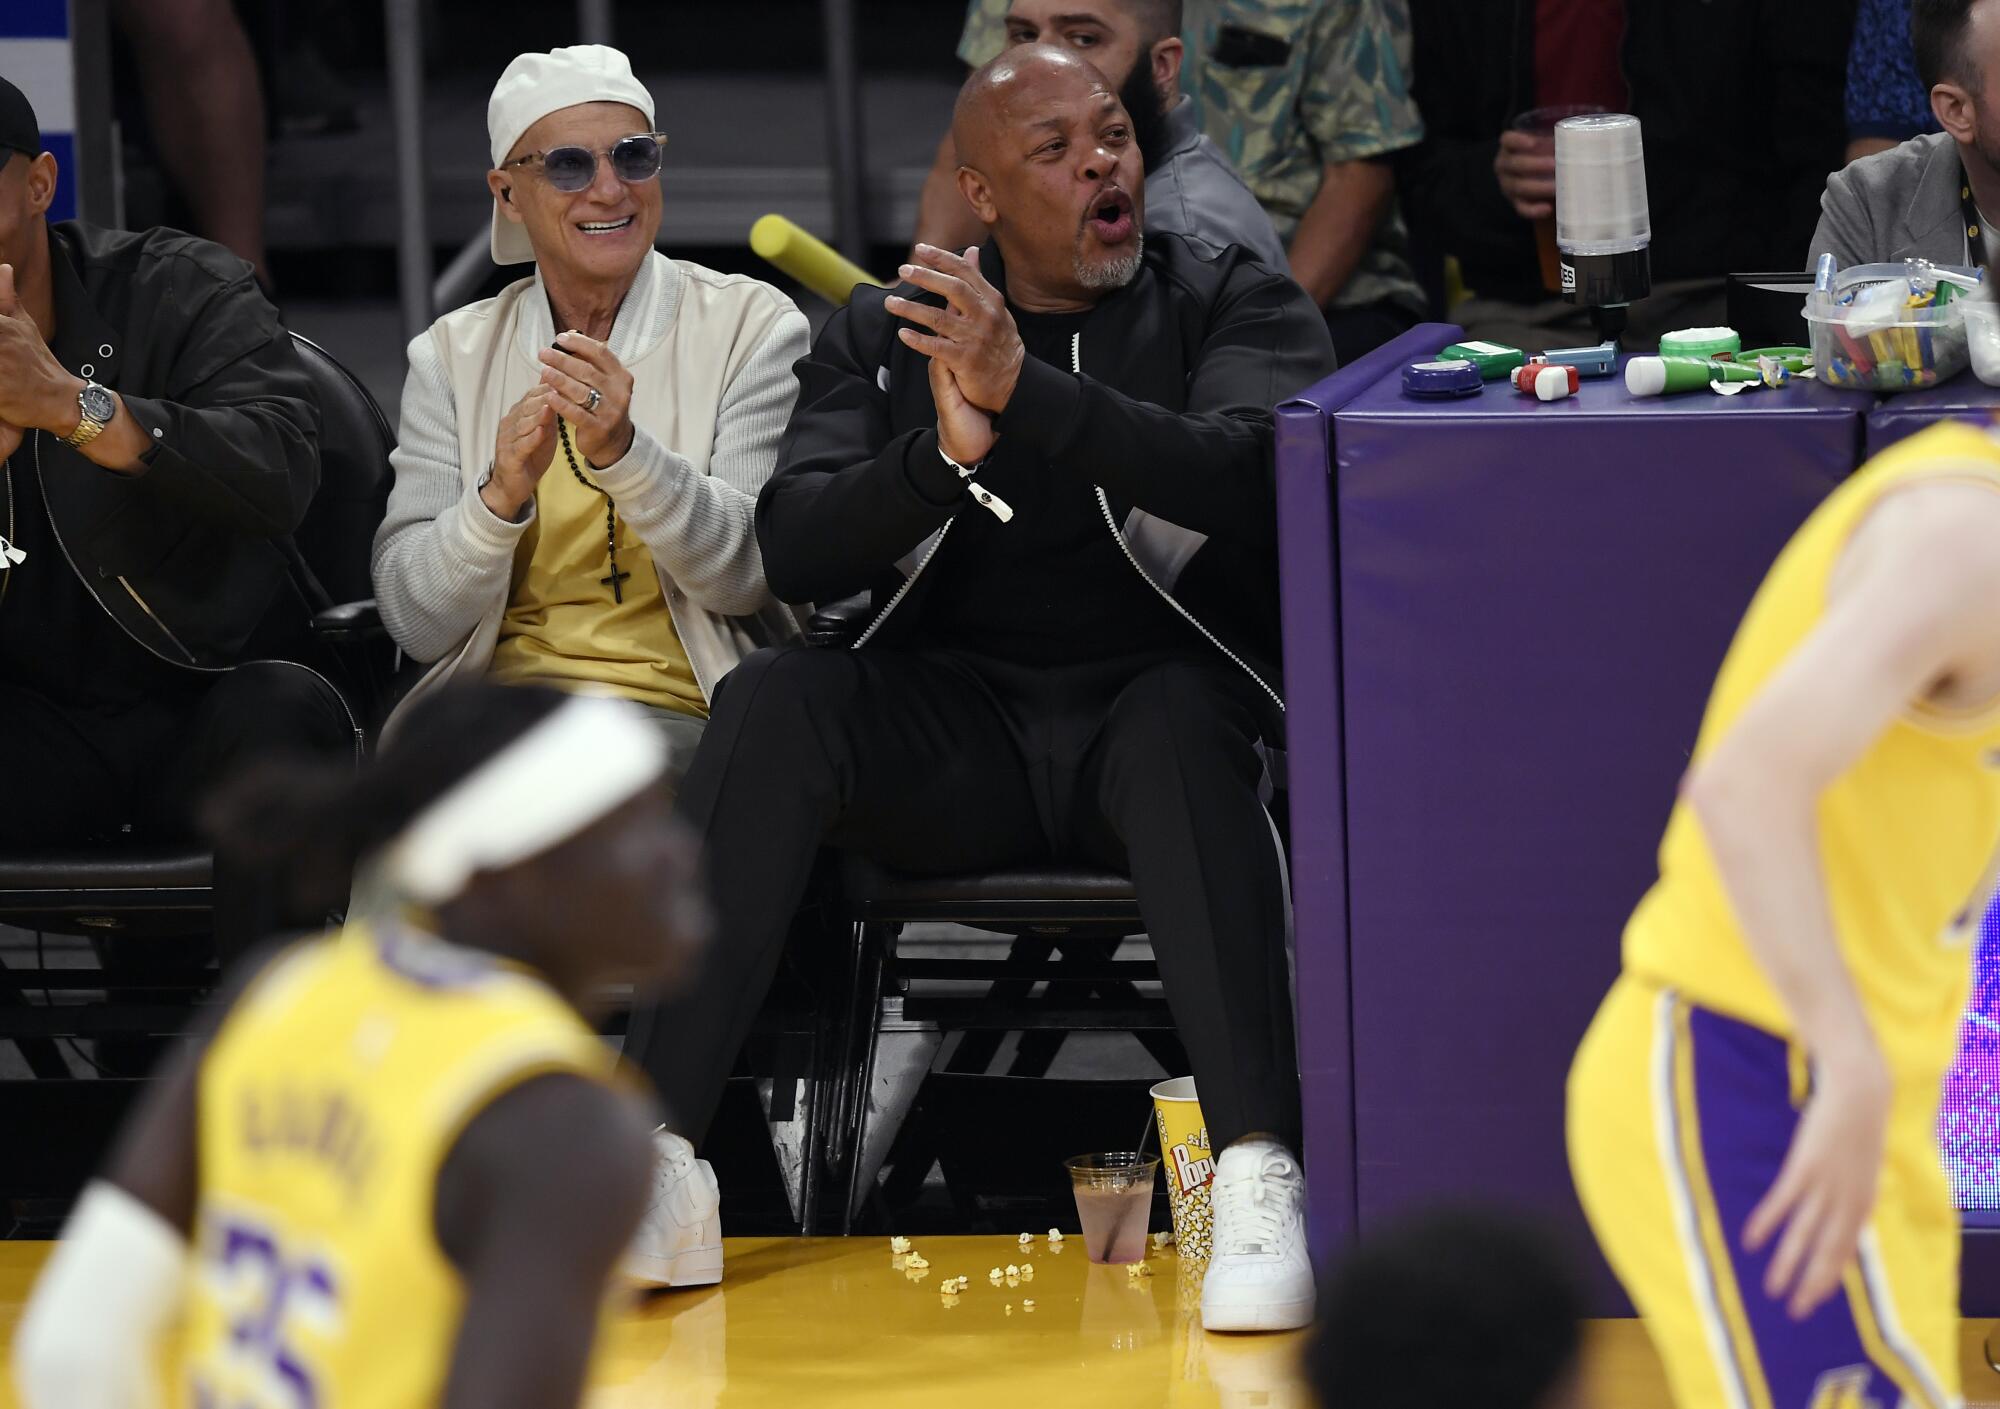 Dr. Dre and Jimmy Iovine attend a basketball game.